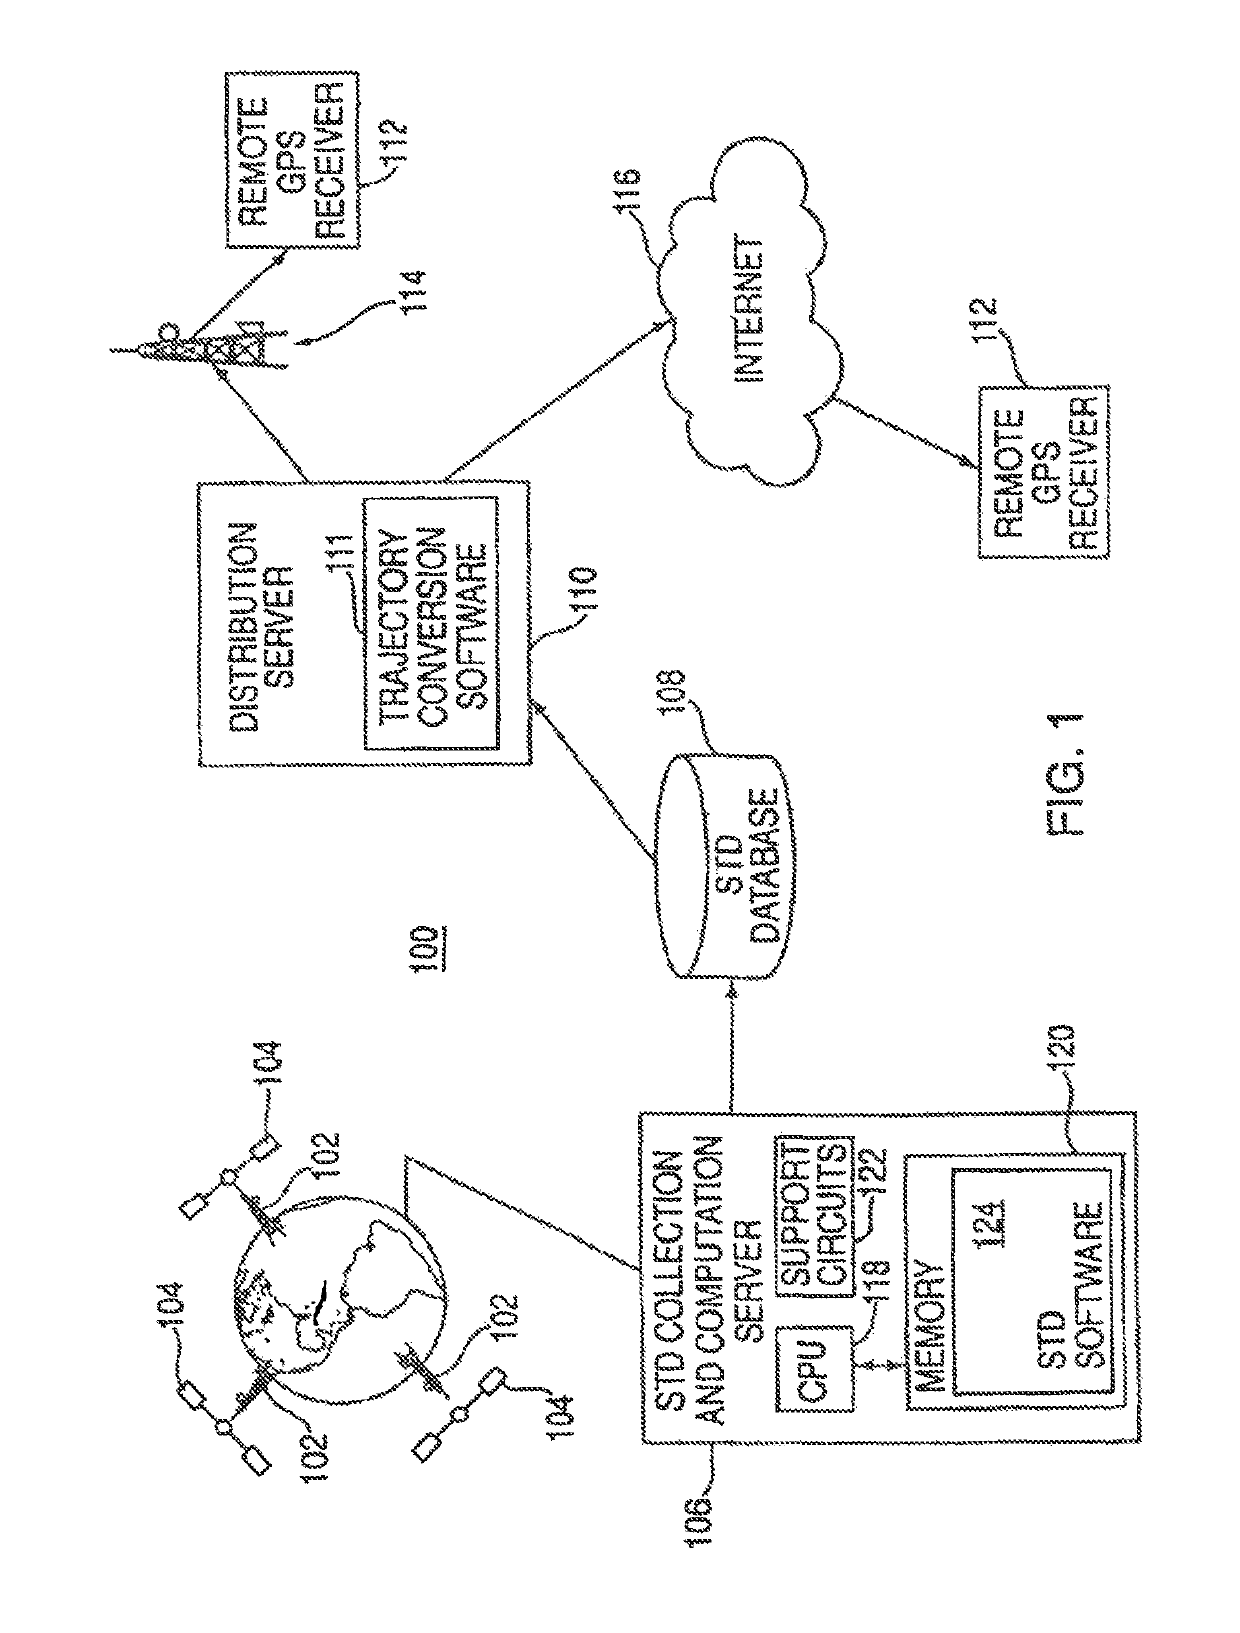 Method and apparatus for generating and distributing satellite tracking information in a compact format